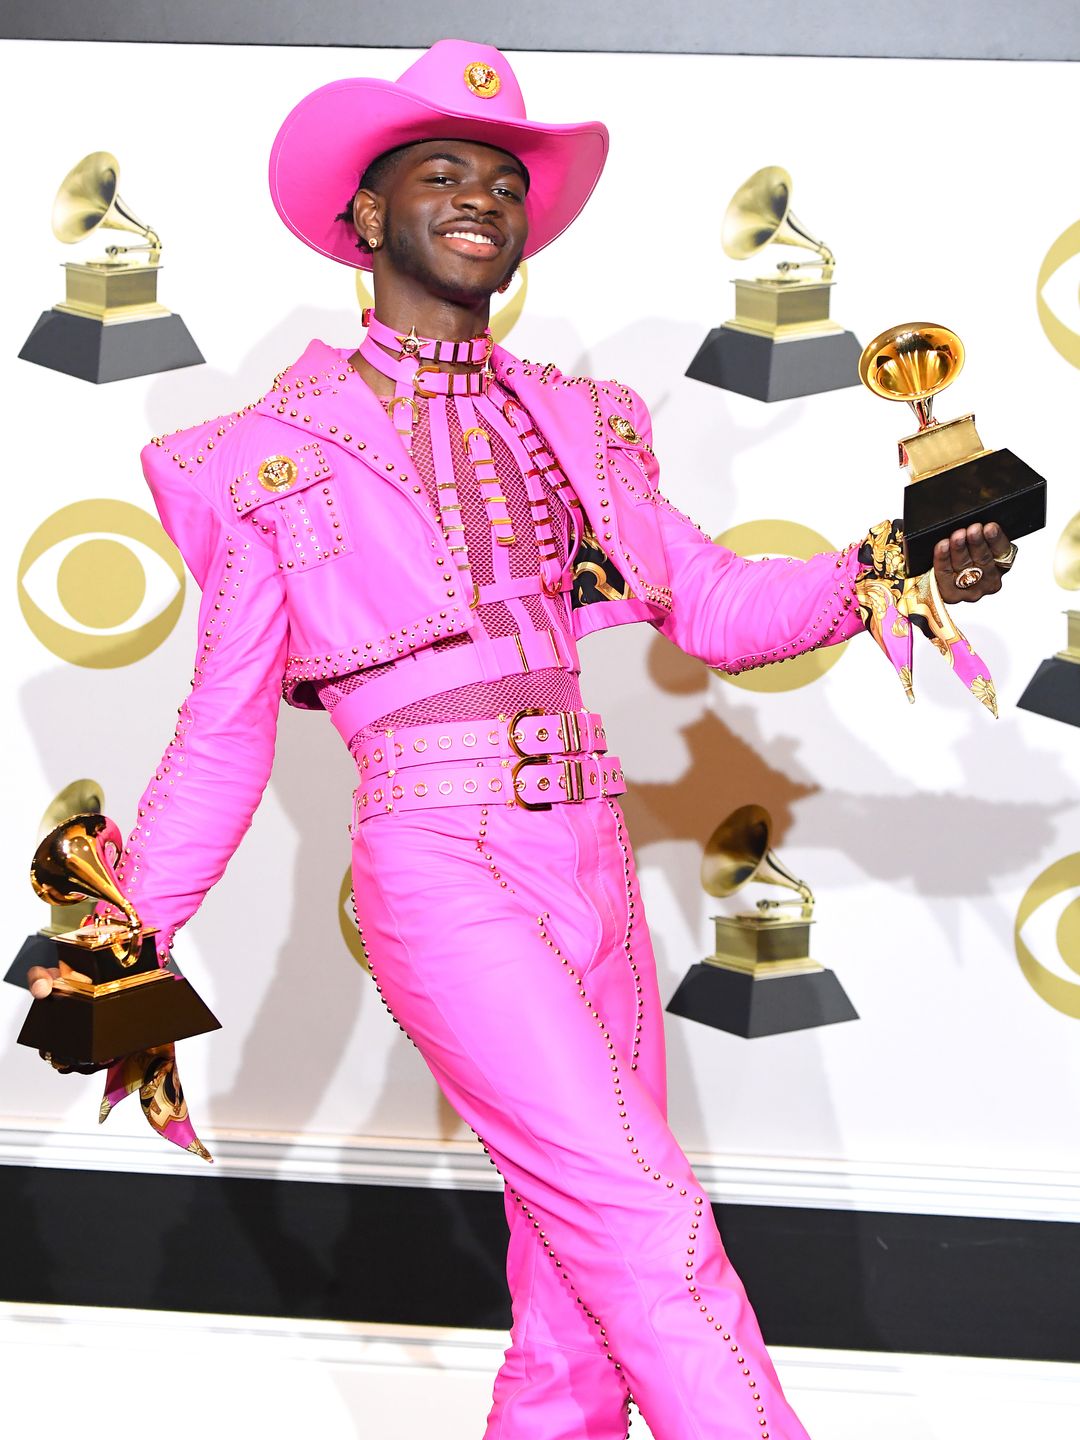  Lil Nas X poses at the 62nd Annual GRAMMY Awards in a Versace Pink suit